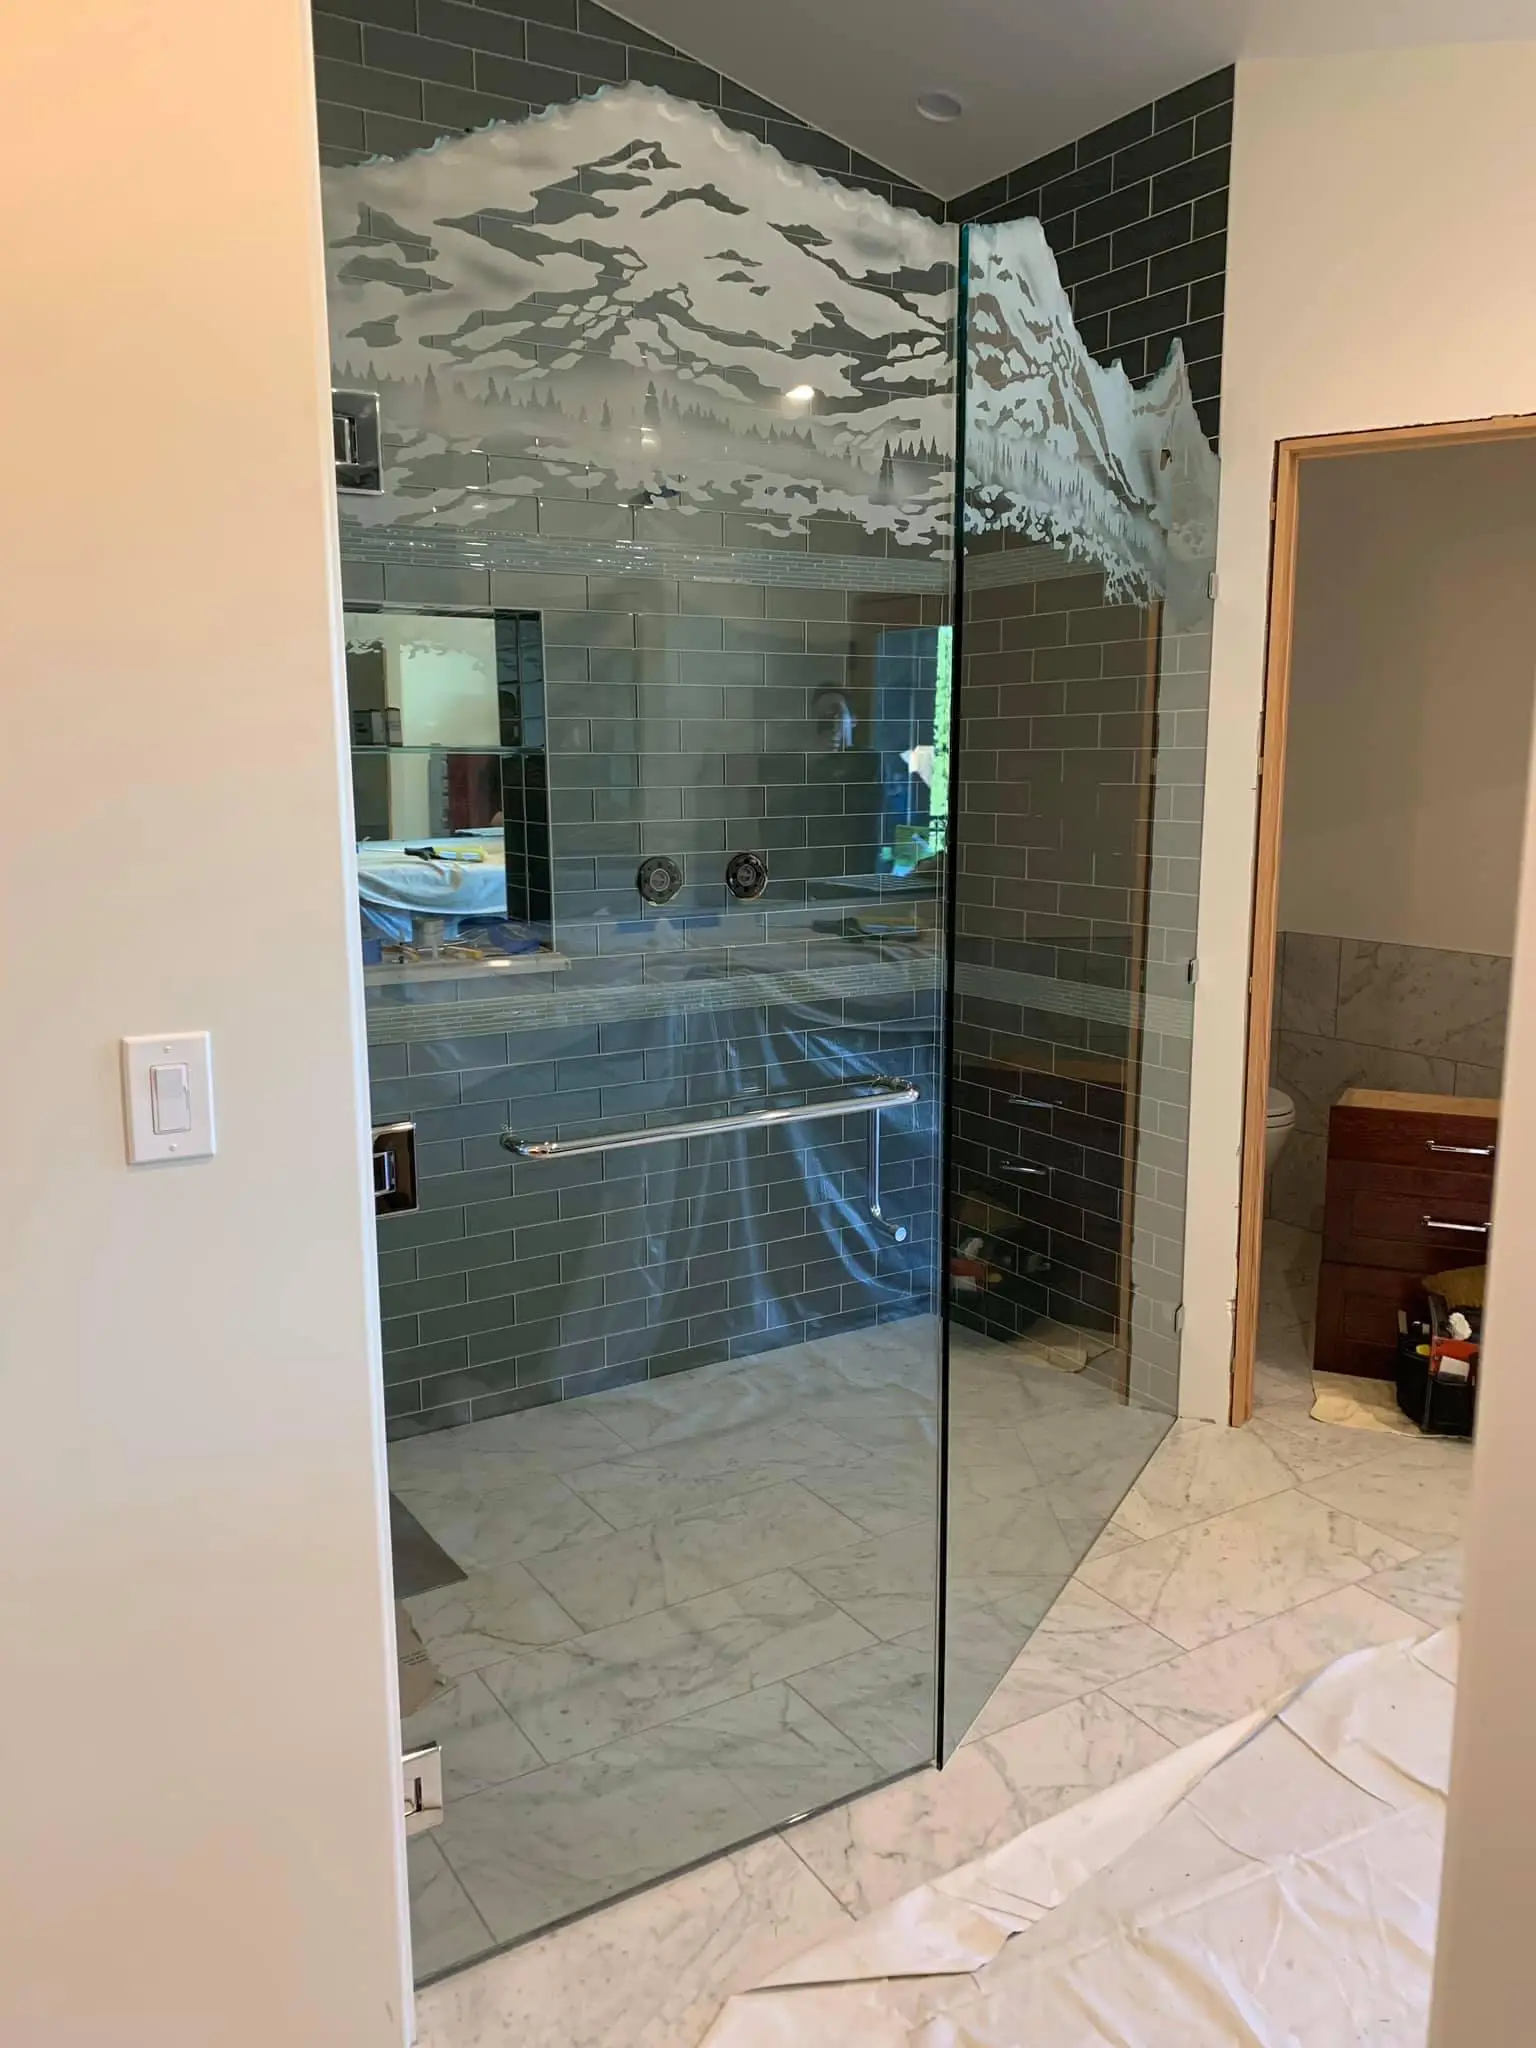 Shower enclosure etched with a mountain and valley scene.